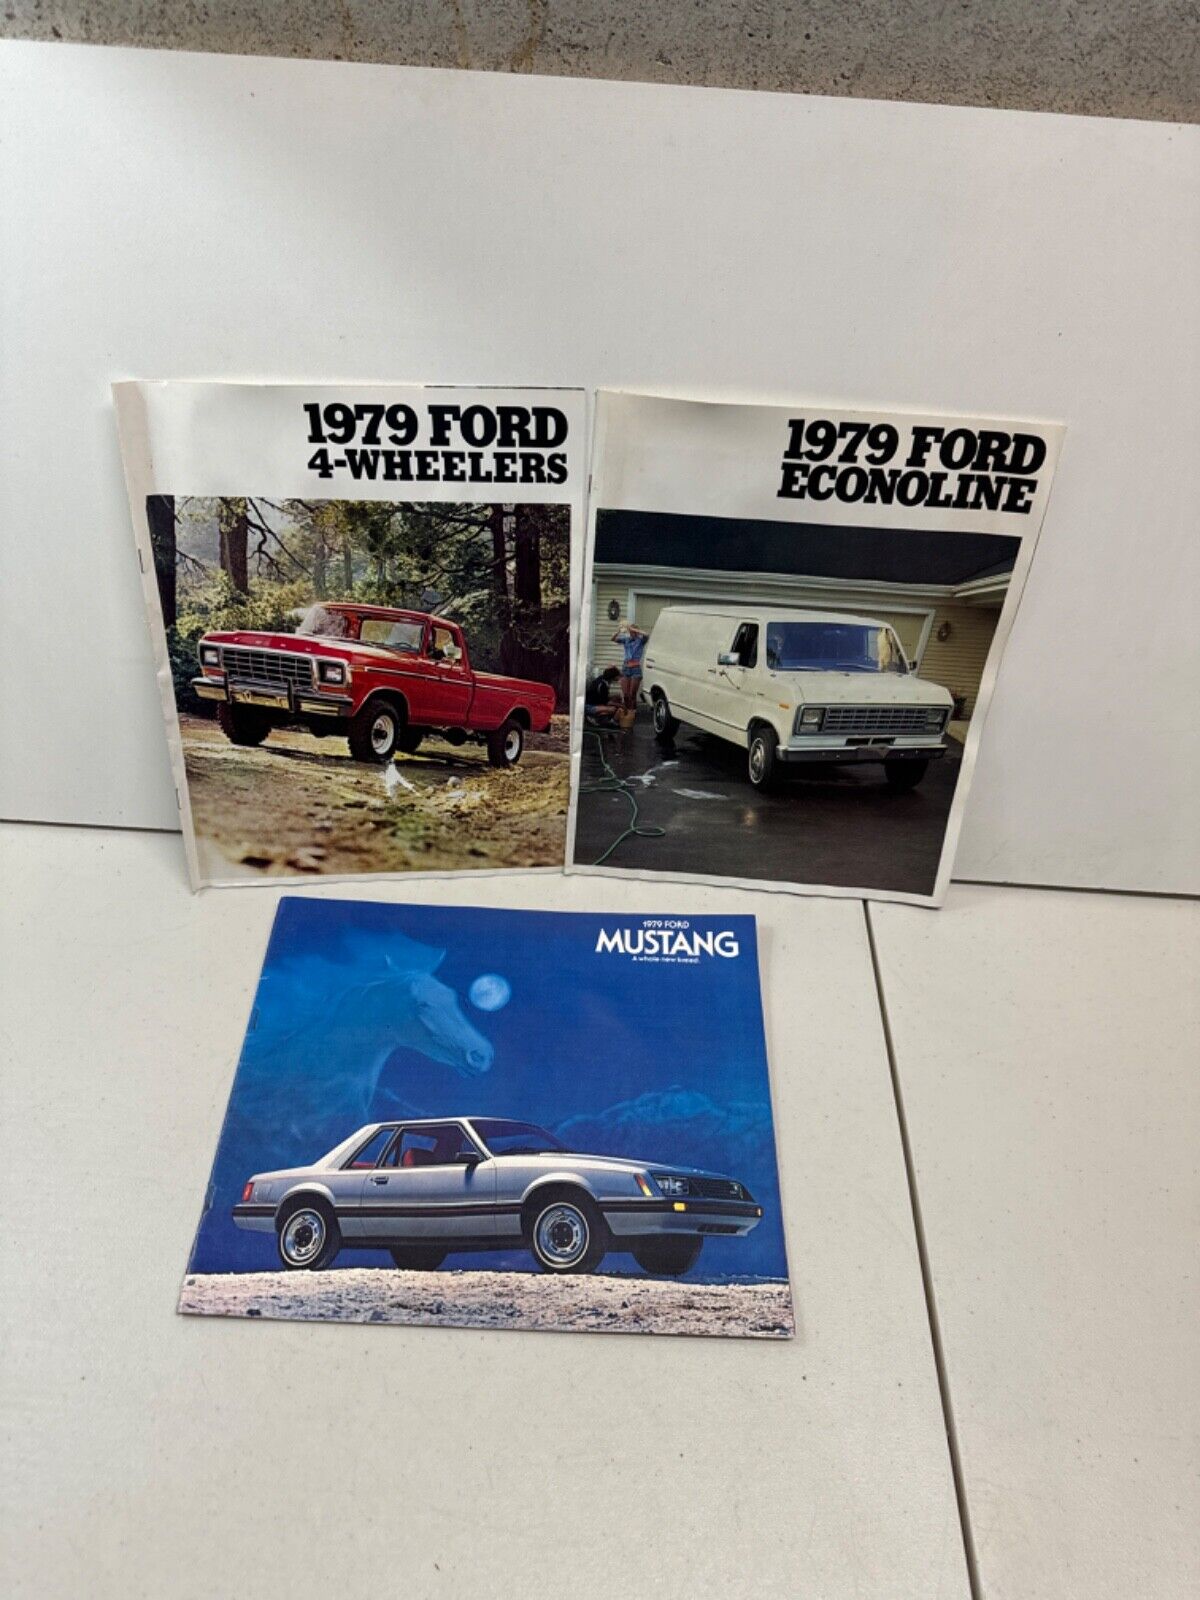 1979 Ford Dealer Brochures-Econoline, 4-Wheelers and Mustang